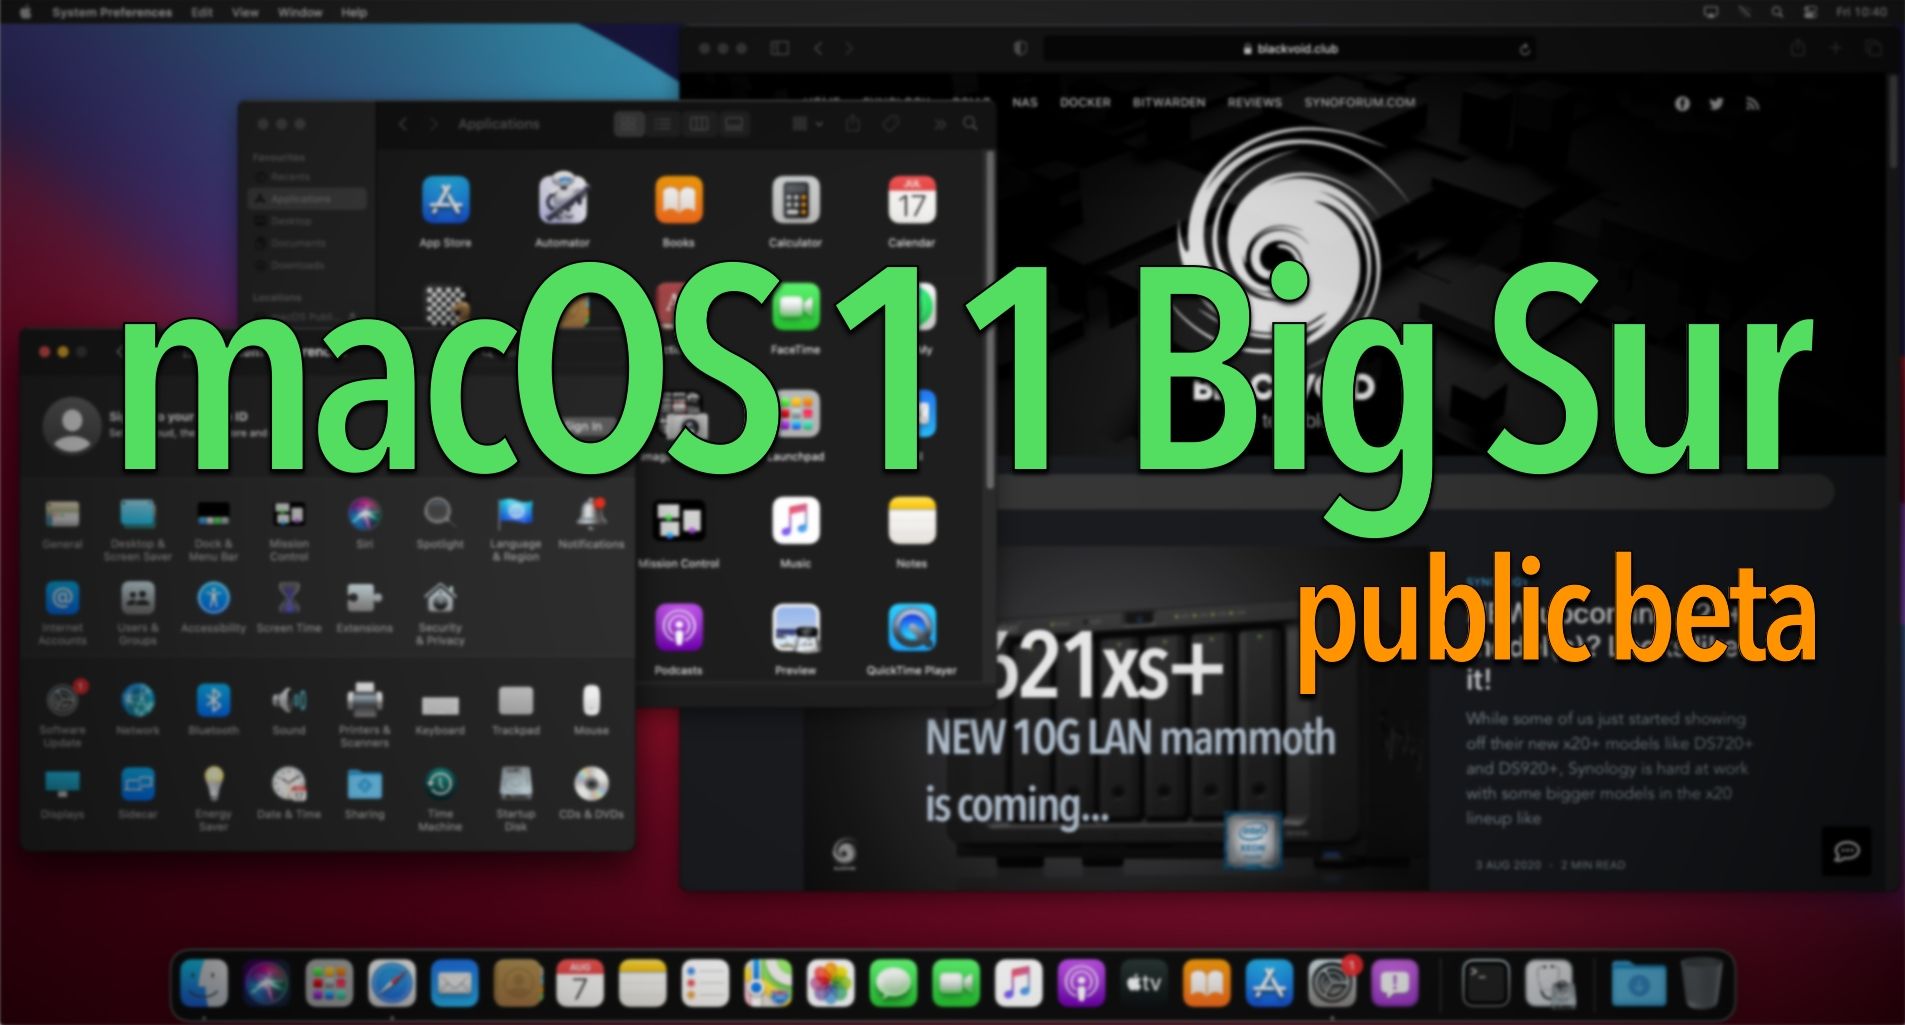 Time to go Big! macOS Big Sur public beta is here